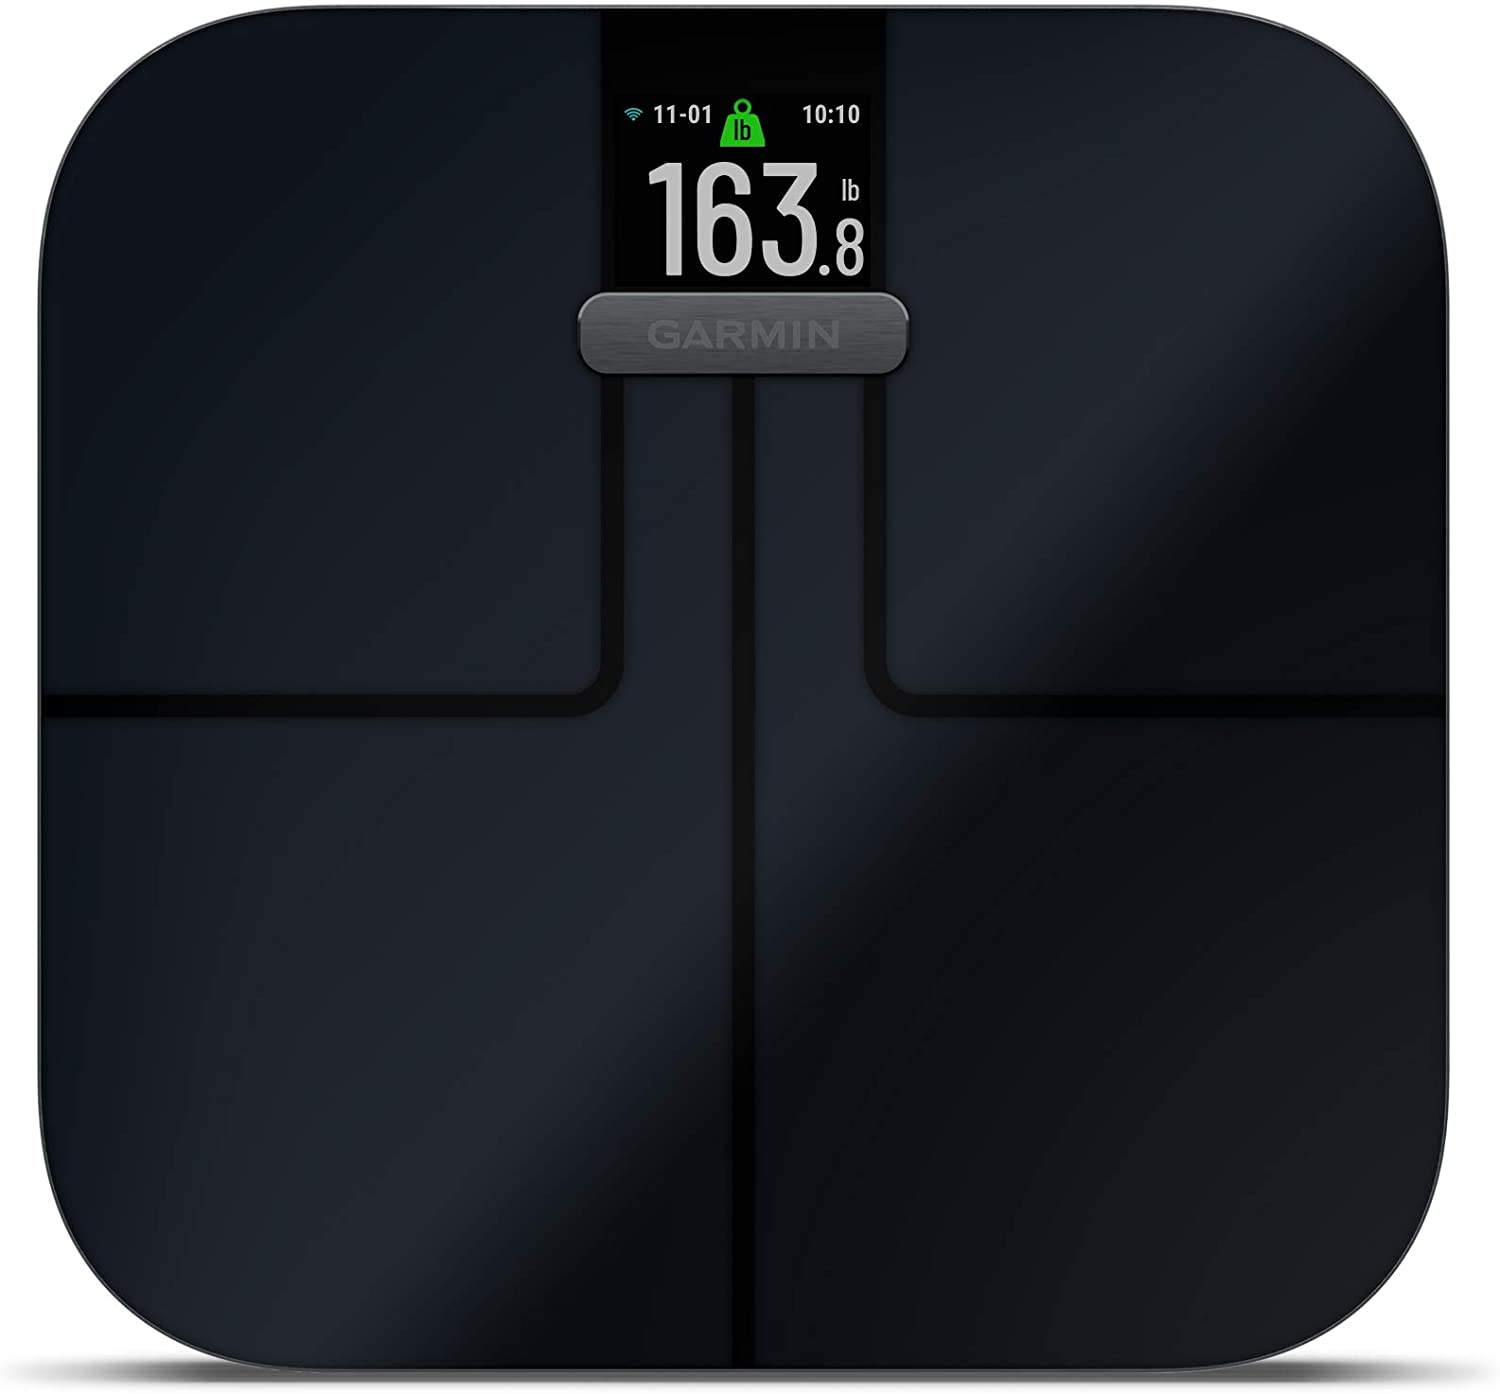 Garmin Index S2 Smart Scale with Wireless Connectivity-Black With Accessories Bundle